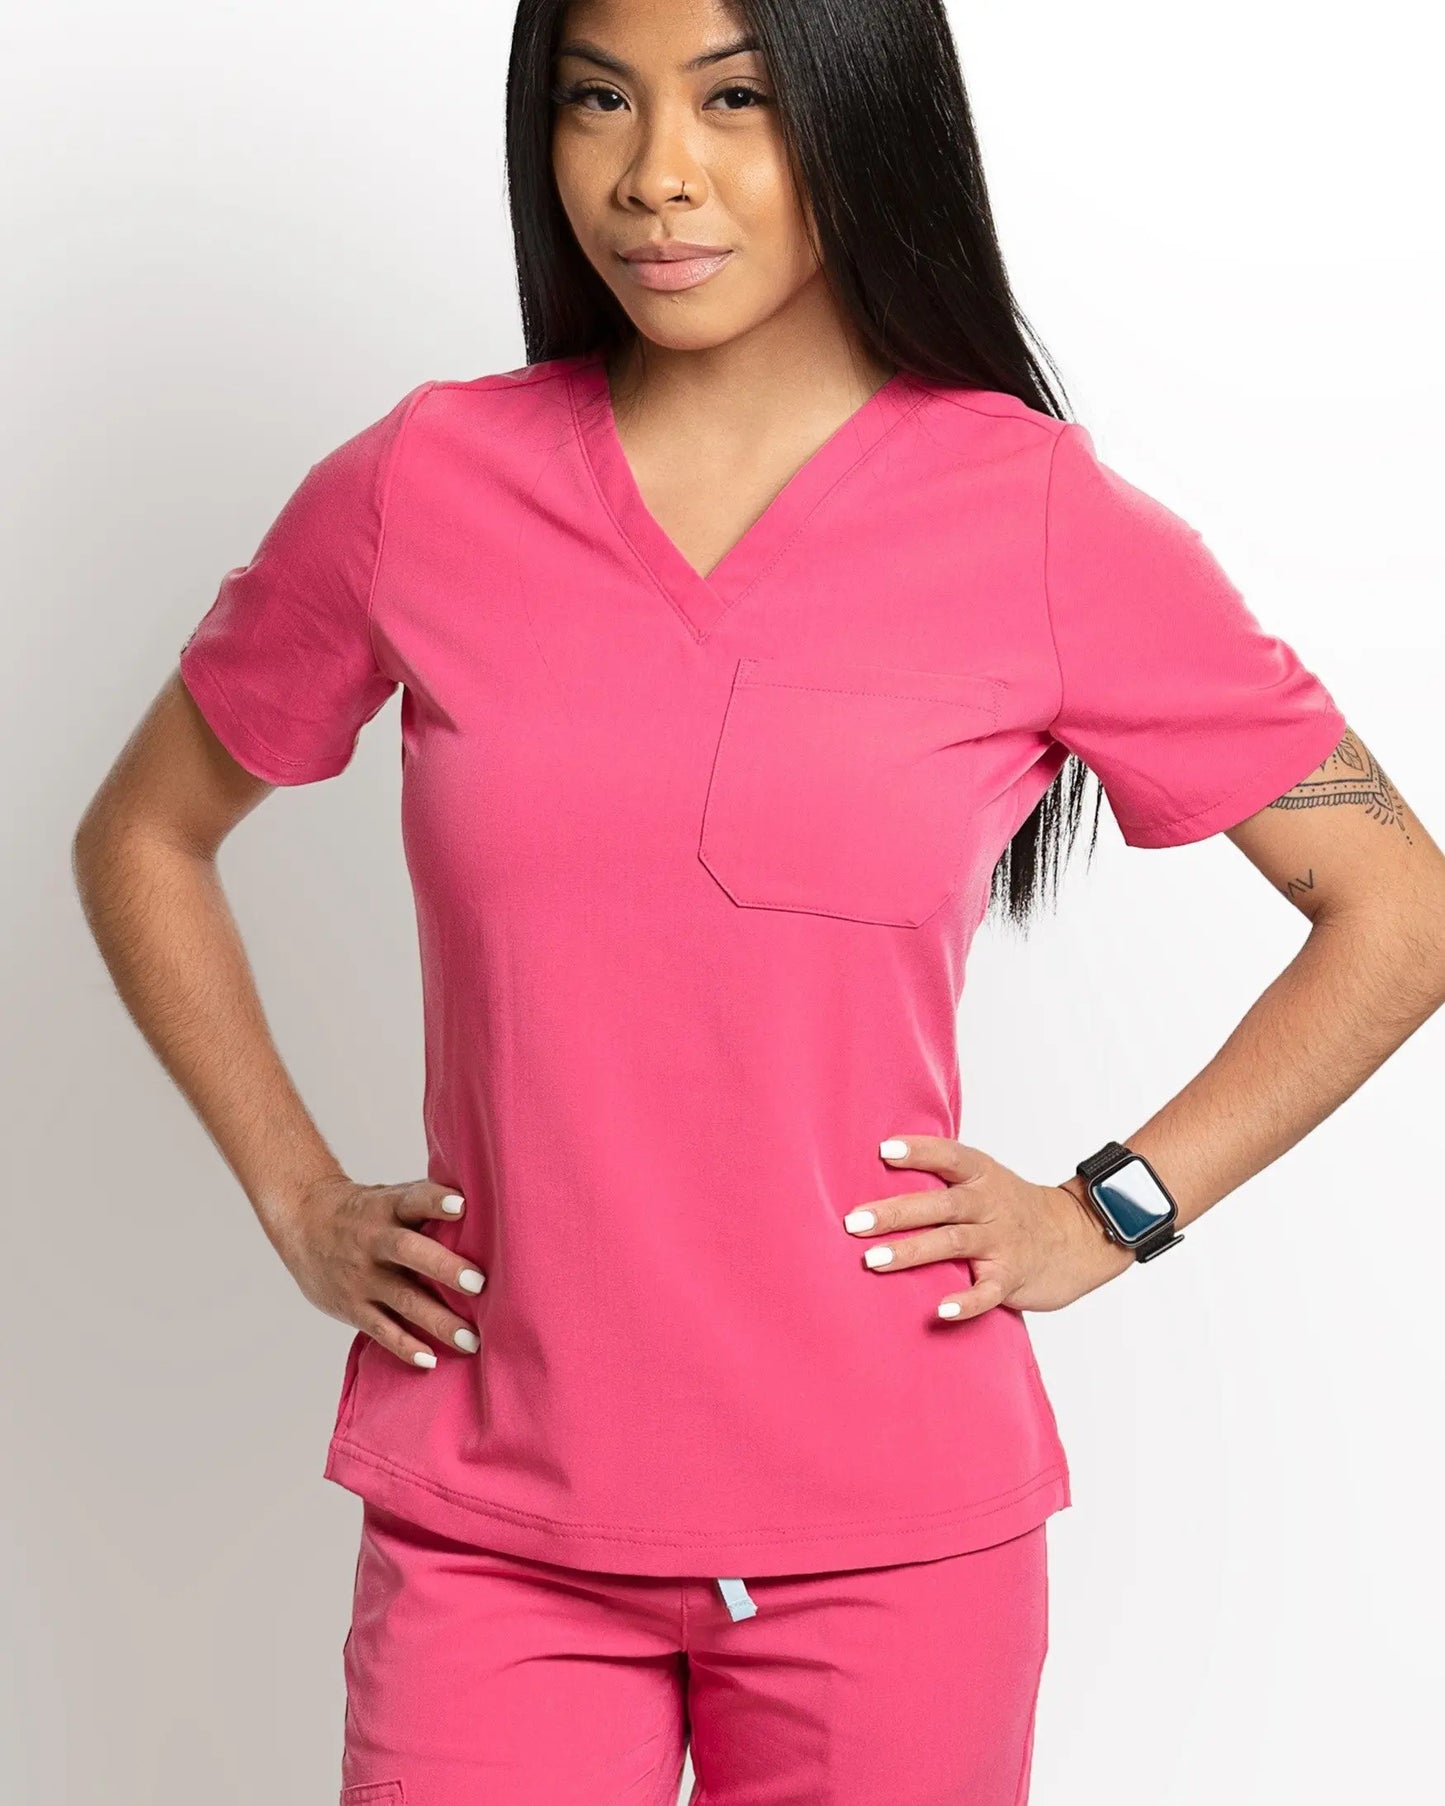 Women's One Pocket Scrub Top - Pink Orchid